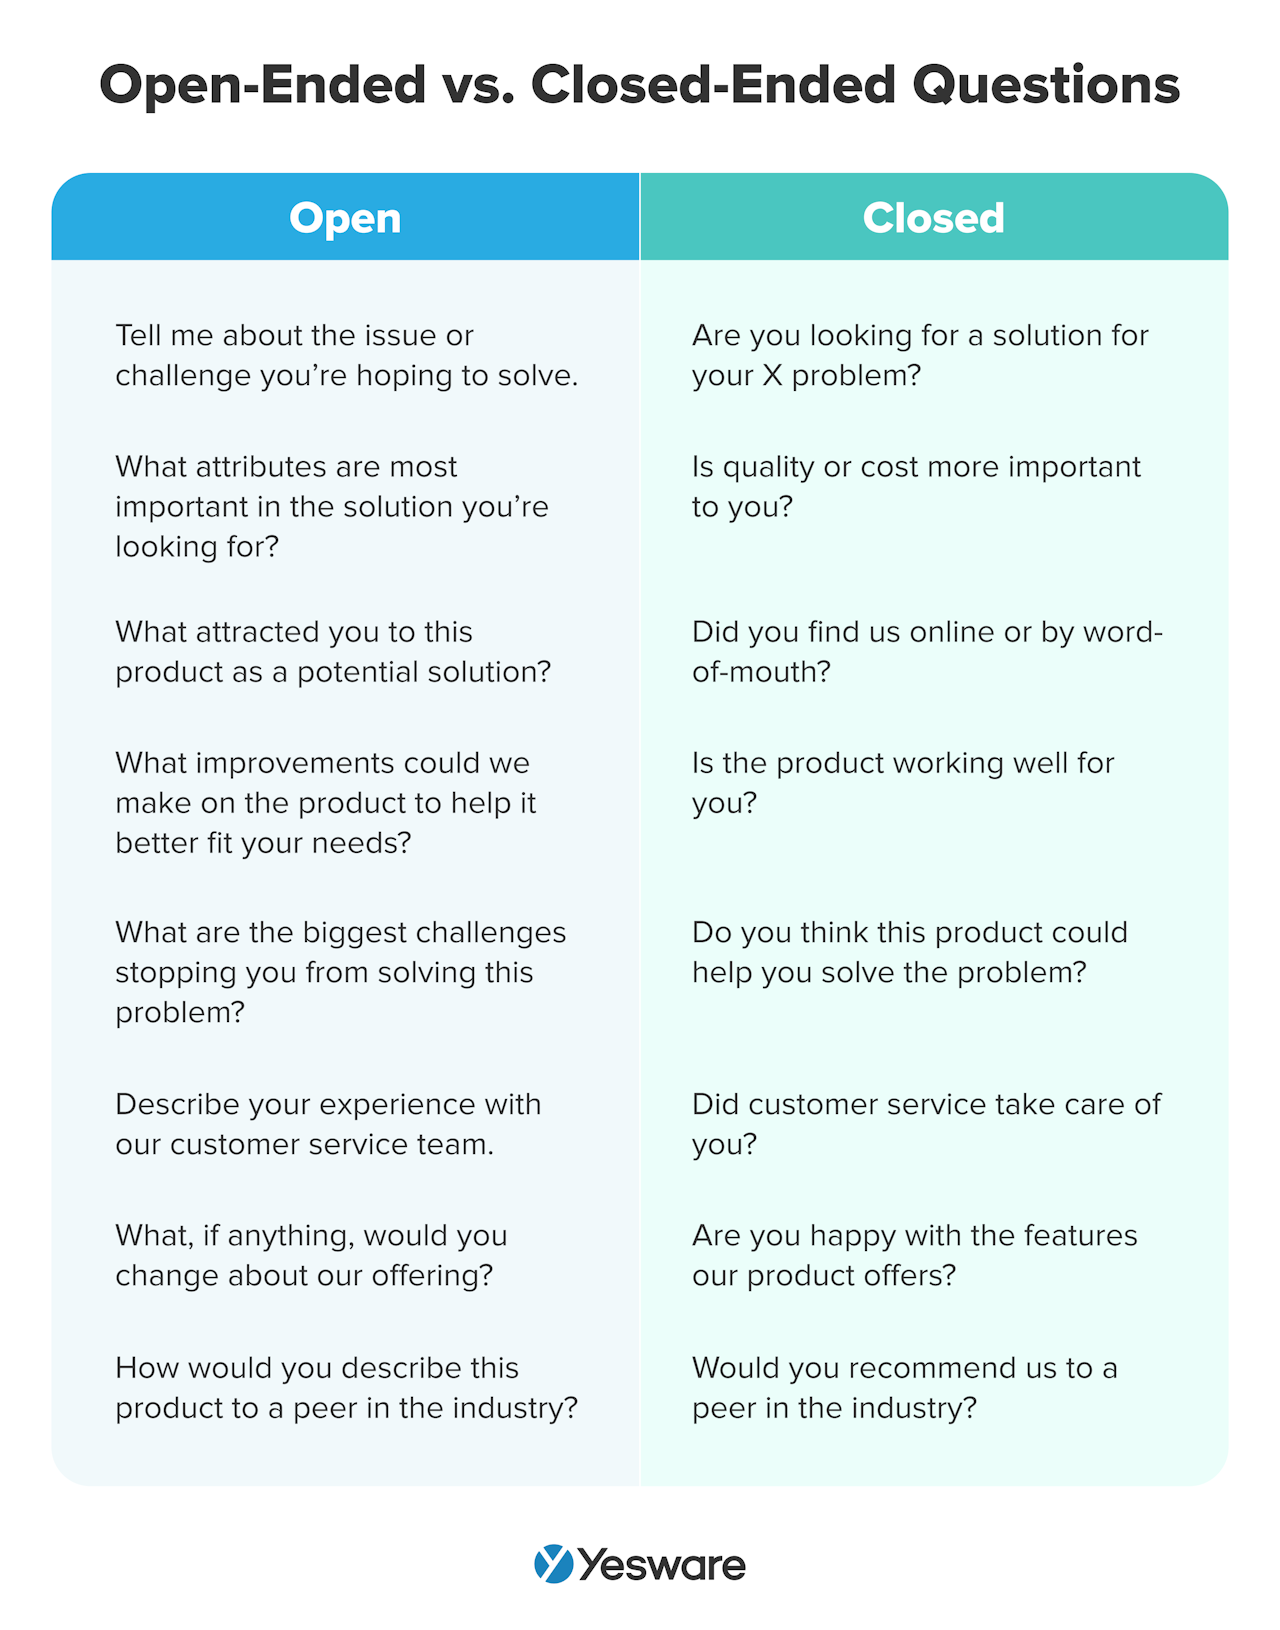 probing questions: open-ended vs closed-ended questions